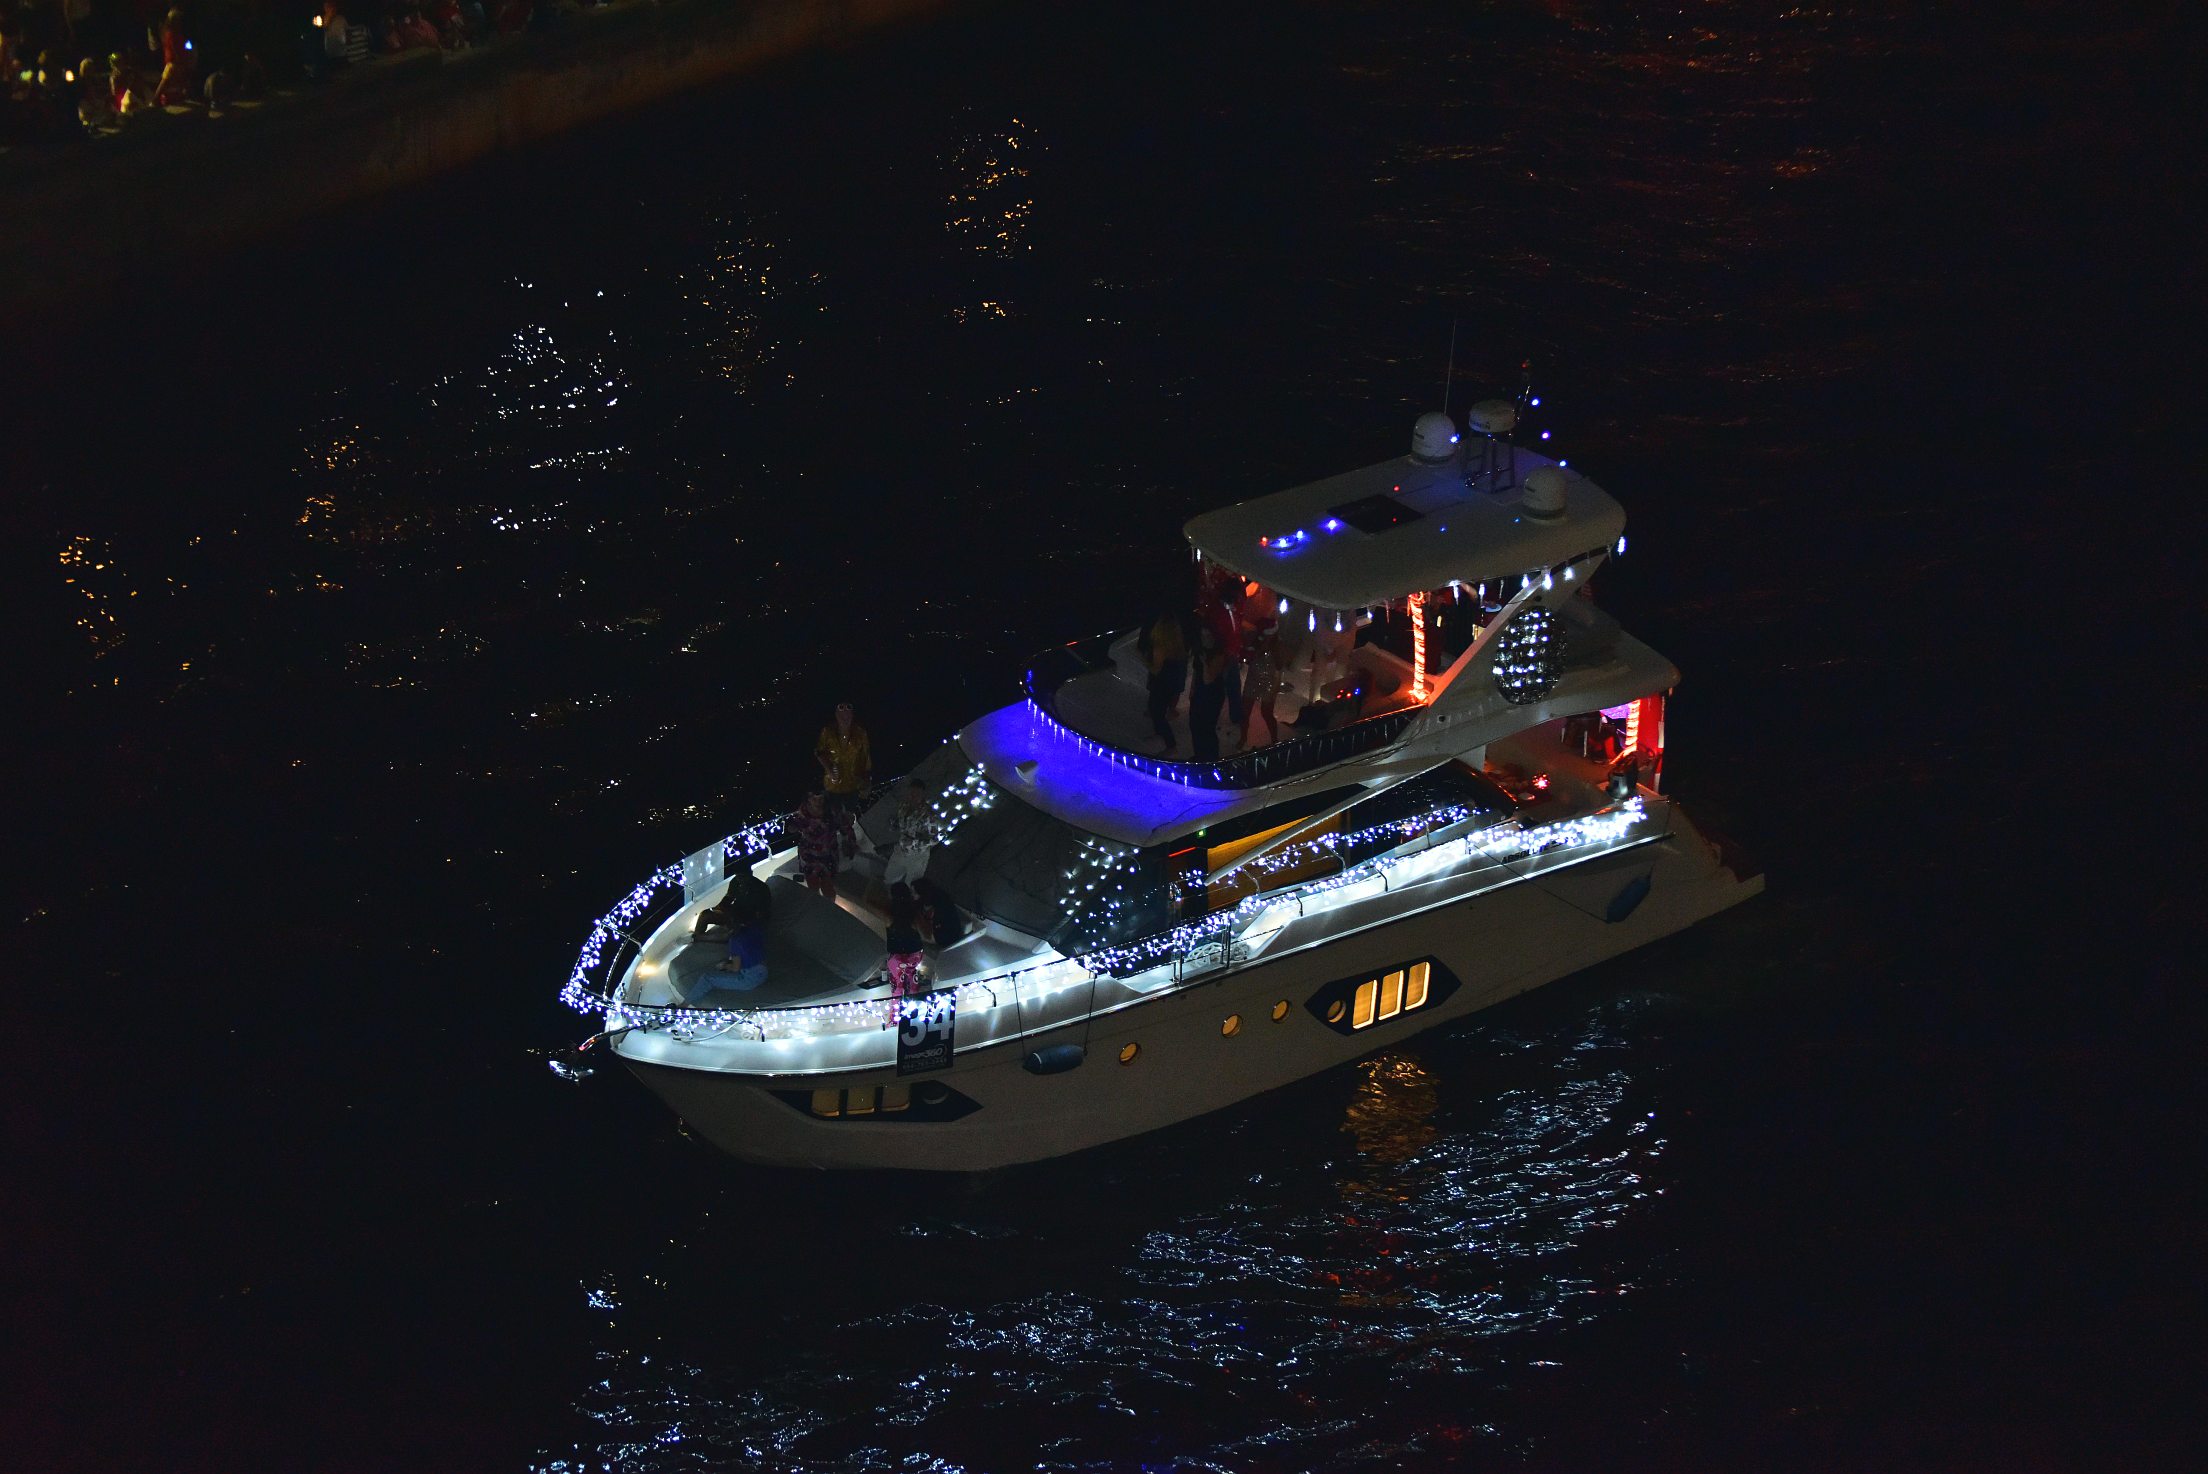 War Eagle, boat number 34 in the 2021 Winterfest Boat Parade